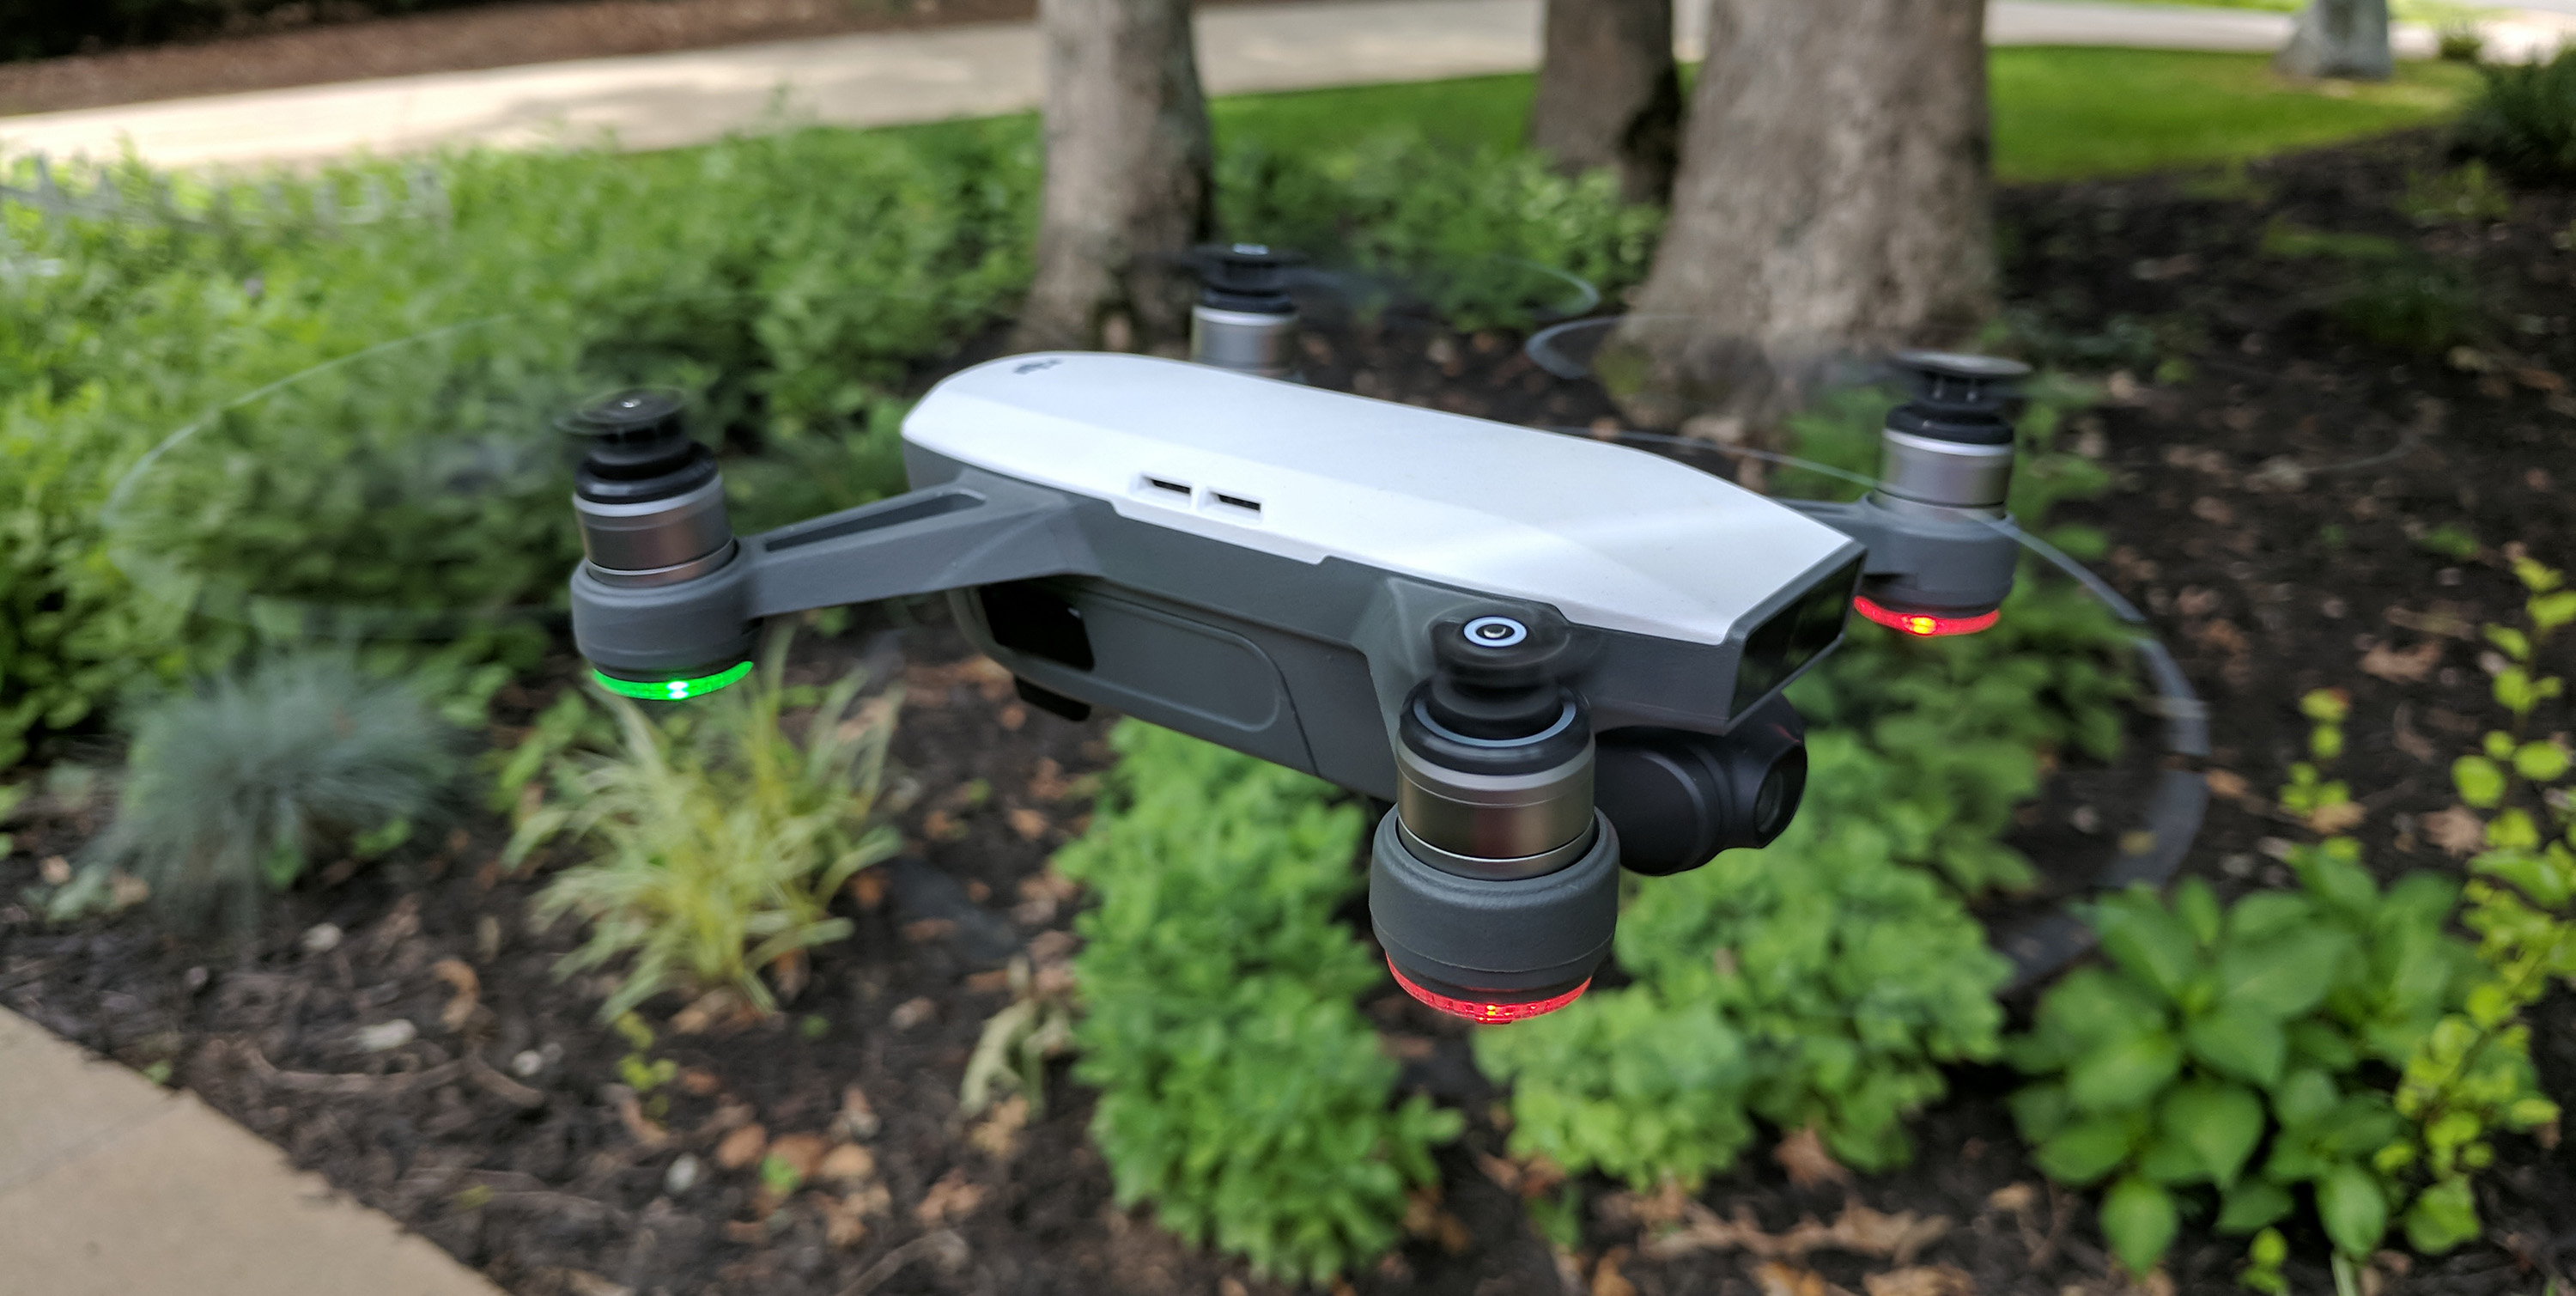 vandtæt Dinkarville Blive skør Having trouble connecting your DJI Spark to iPhone? Here's how to fix it -  9to5Mac